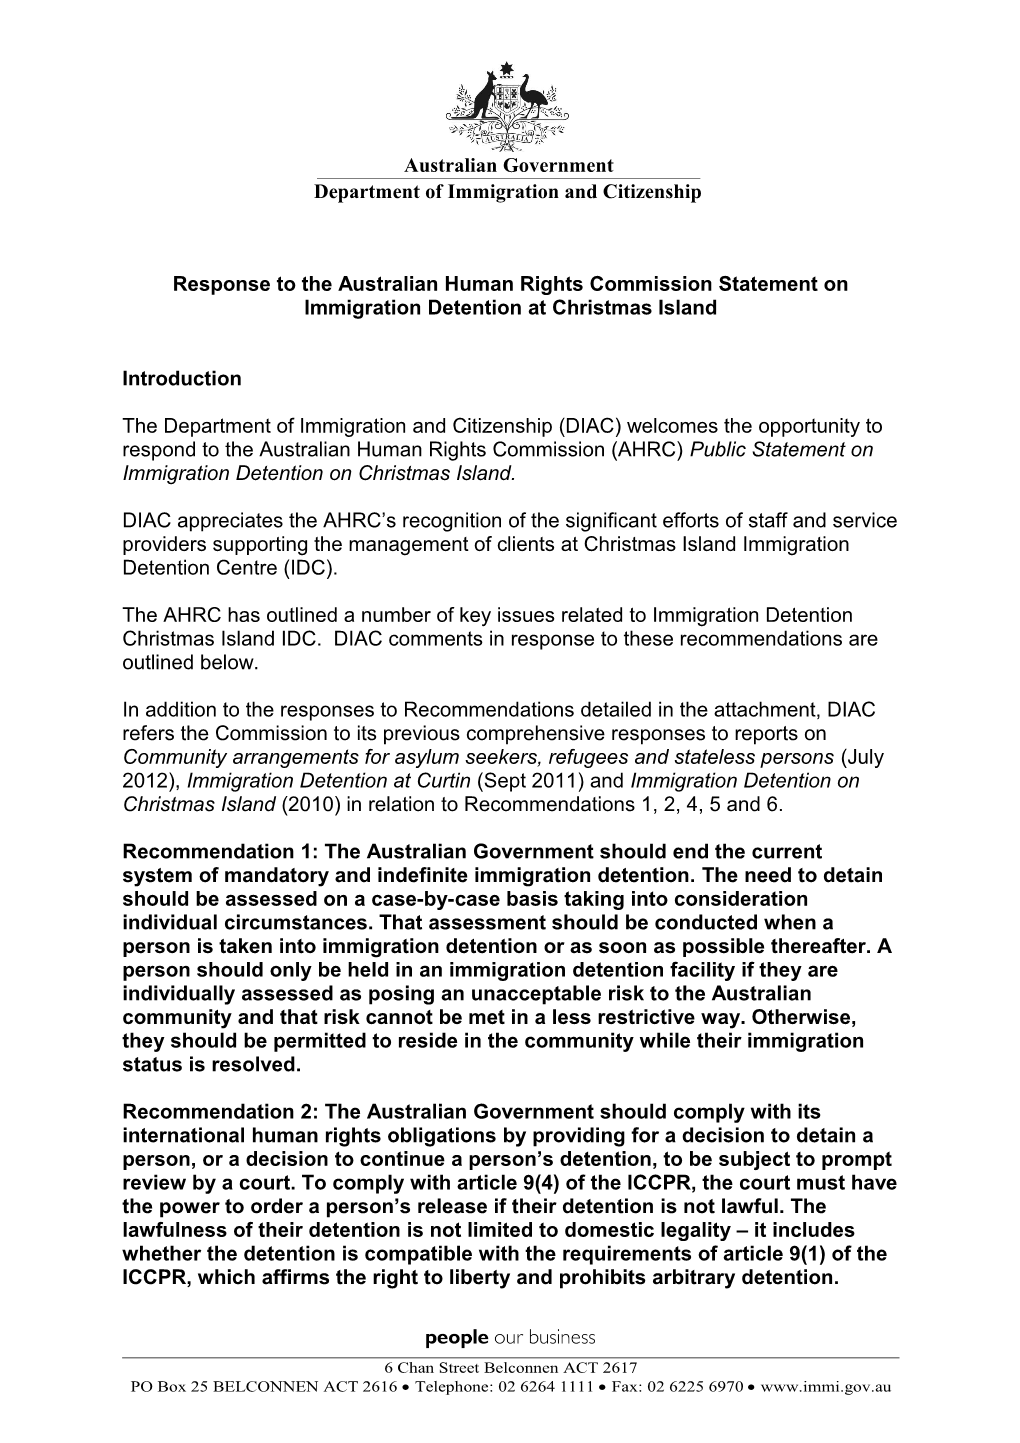 Response to the Australian Human Rights Commission Statement on Immigration Detention